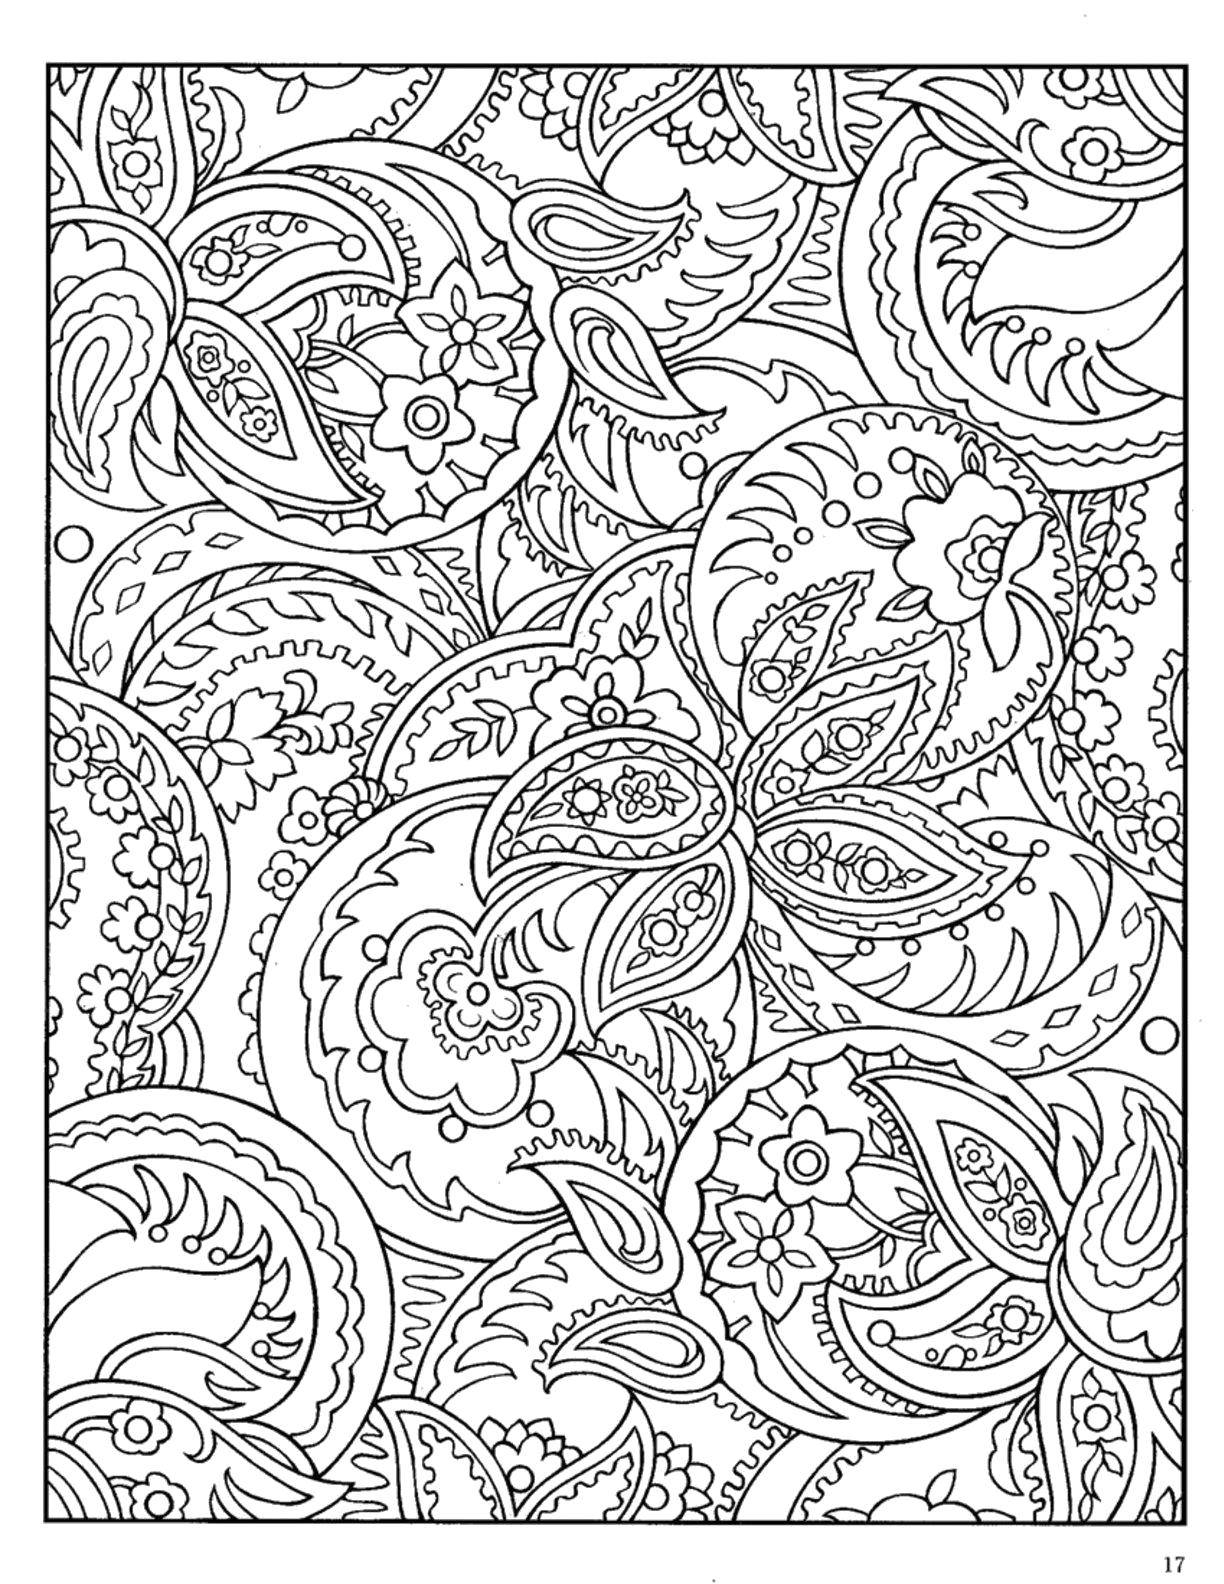 Coloring Beautiful pattern. Category patterns. Tags:  Patterns, people.